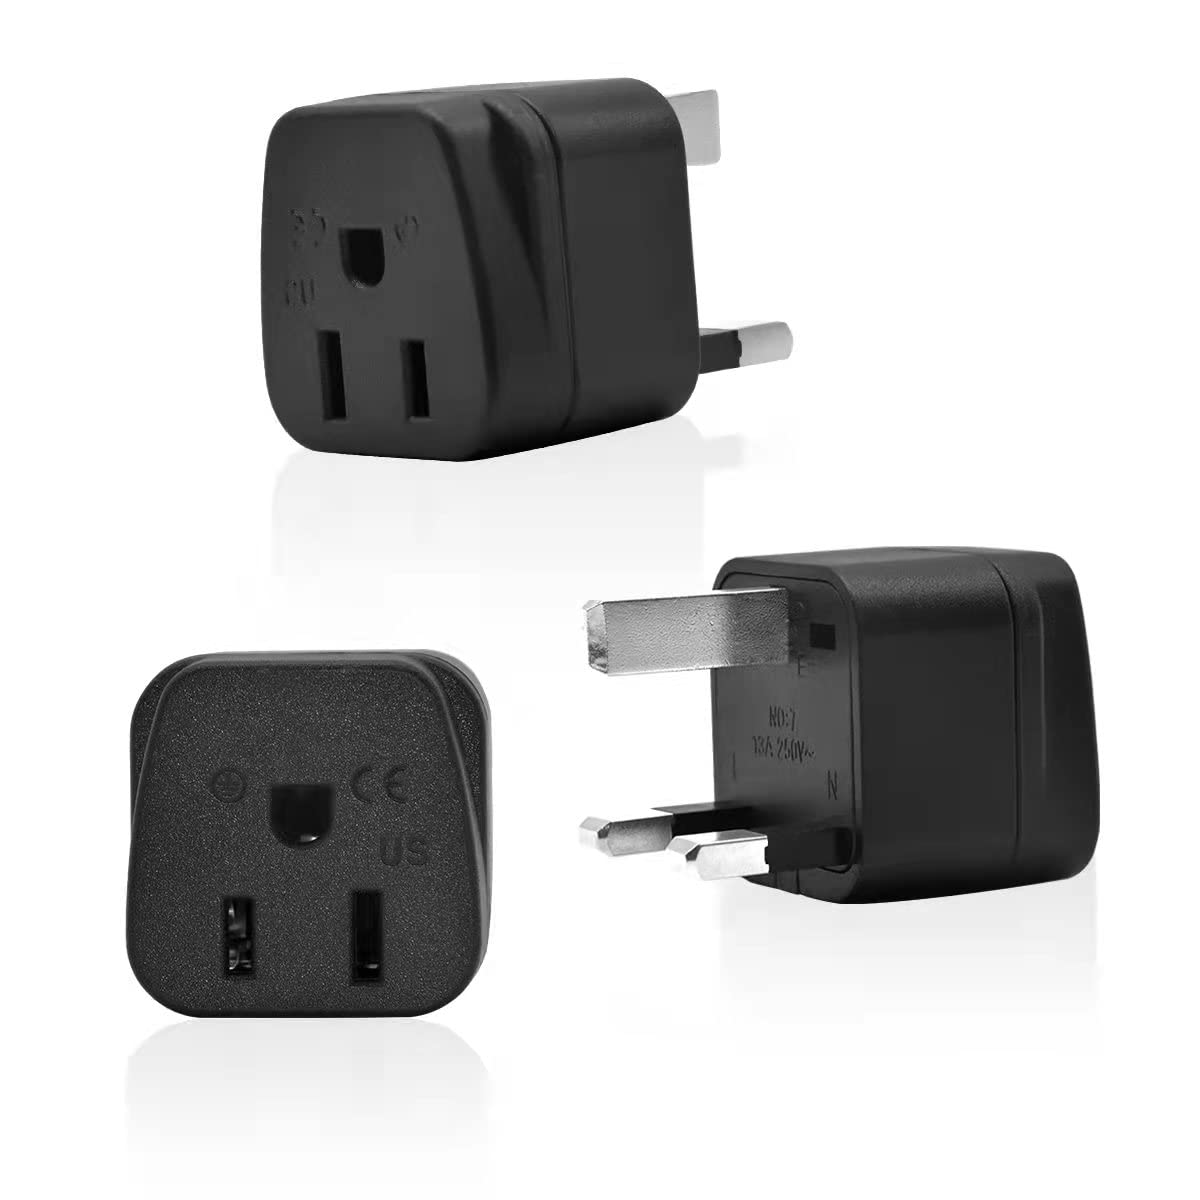 3-Pack US to UK Plug Adapter,SHUOMAO 2/3 Pin USA to 3 Pin UK Plug Adaptor,American/Canada/Mexico/Japan to British Plug Converter Power Adapter,for Type A/Type B Plug